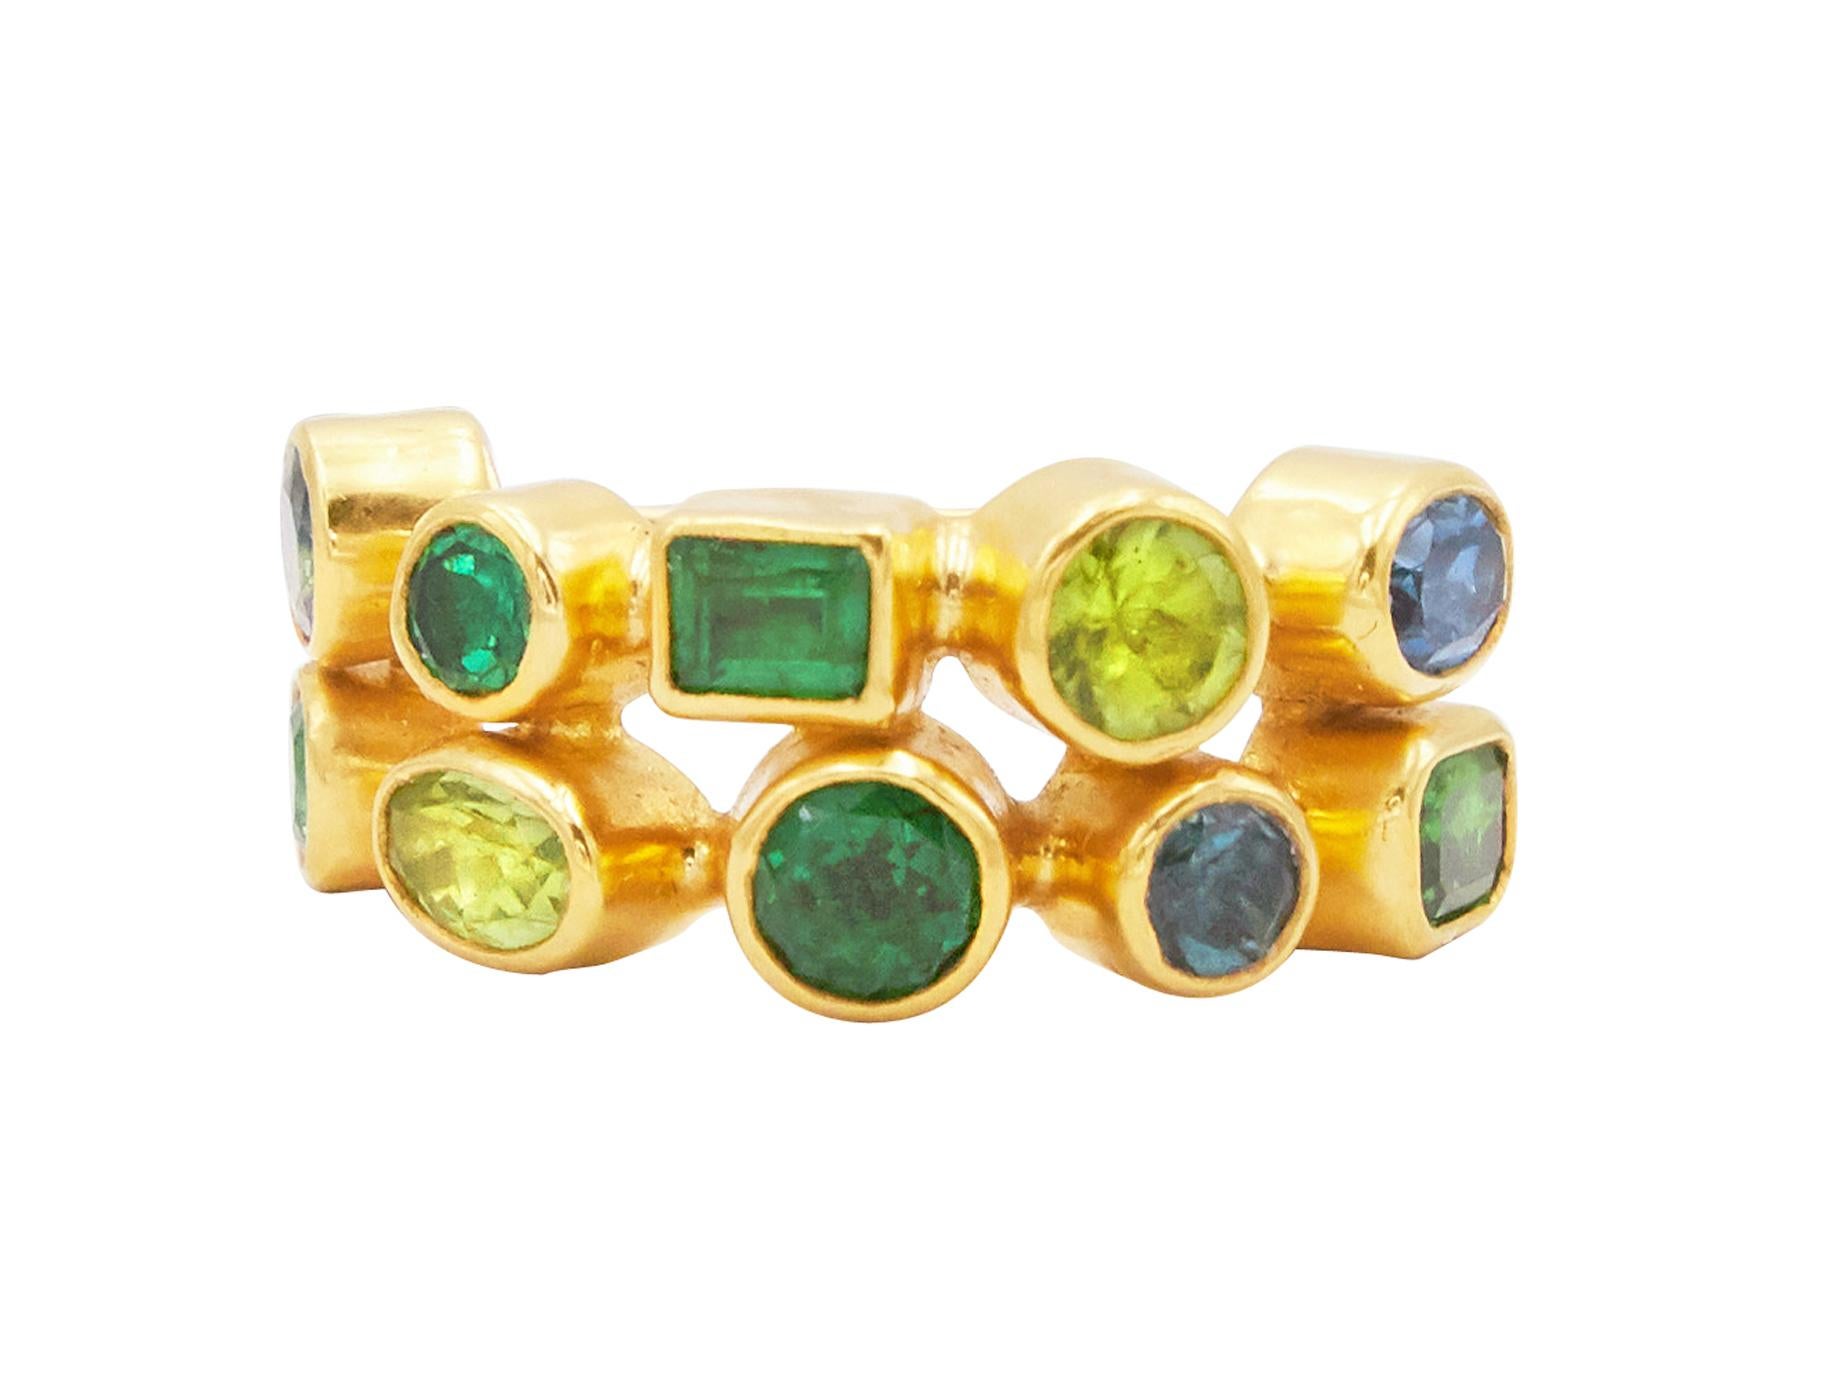 GURHAN one-of-a-kind cocktail ring set in 24 Karat hammered yellow gold featuring (10) mixed sized and shaped stones; (1) Sapphire, (1) Blue Topaz, (1) Tourmaline, (2) Peridots, (5) Tsavorites, 4.35 total carat weight.  Bezel setting with 22 Karat